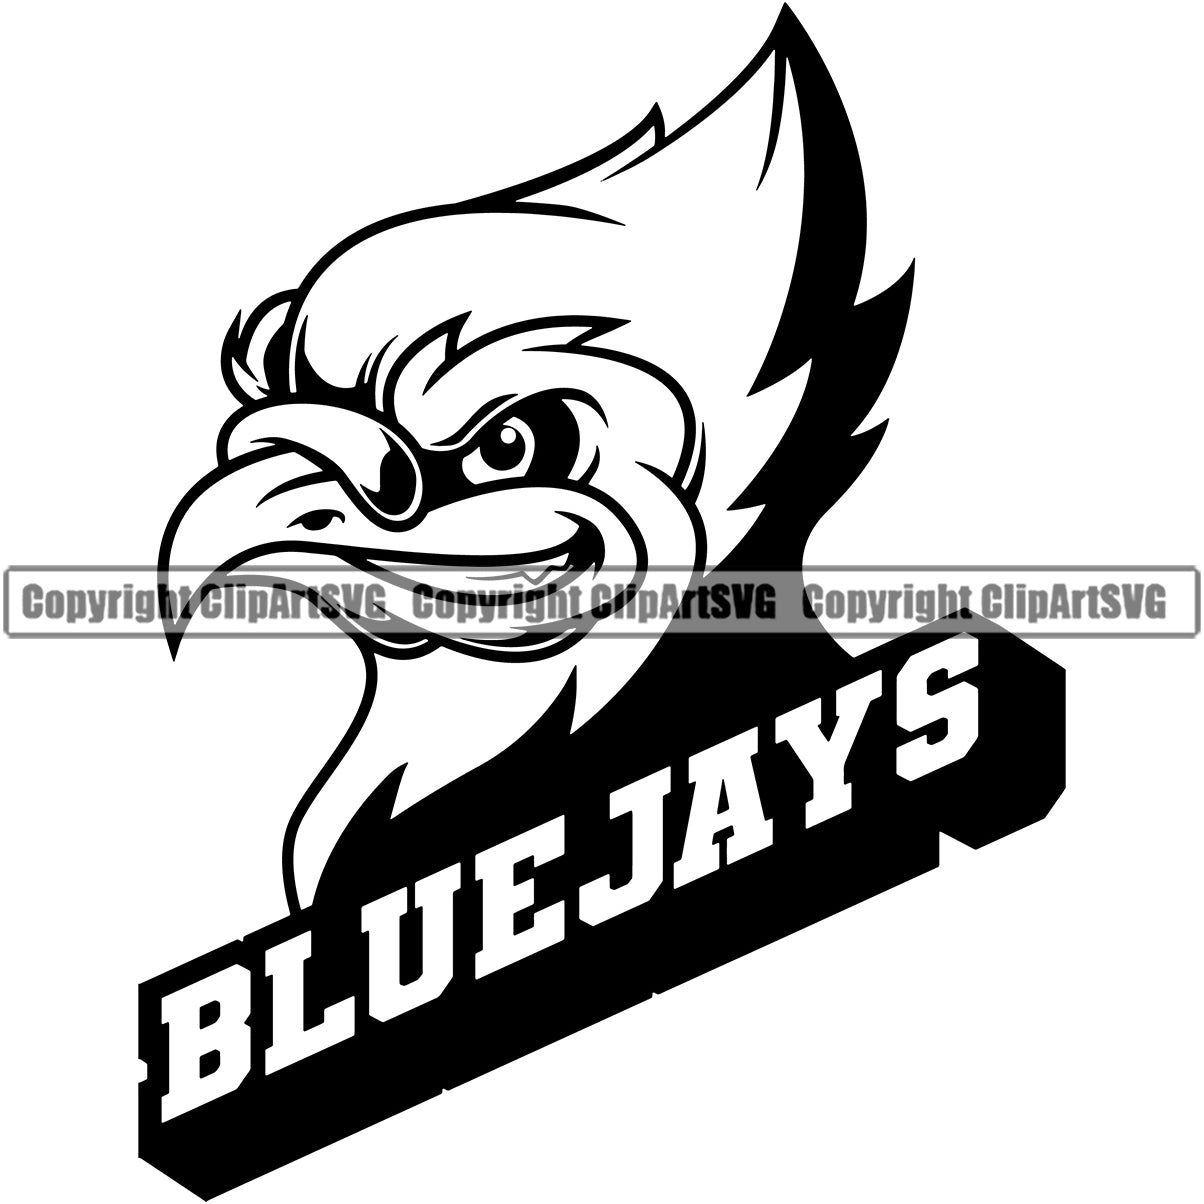 Blue Jays Mascot Cliparts, Stock Vector and Royalty Free Blue Jays